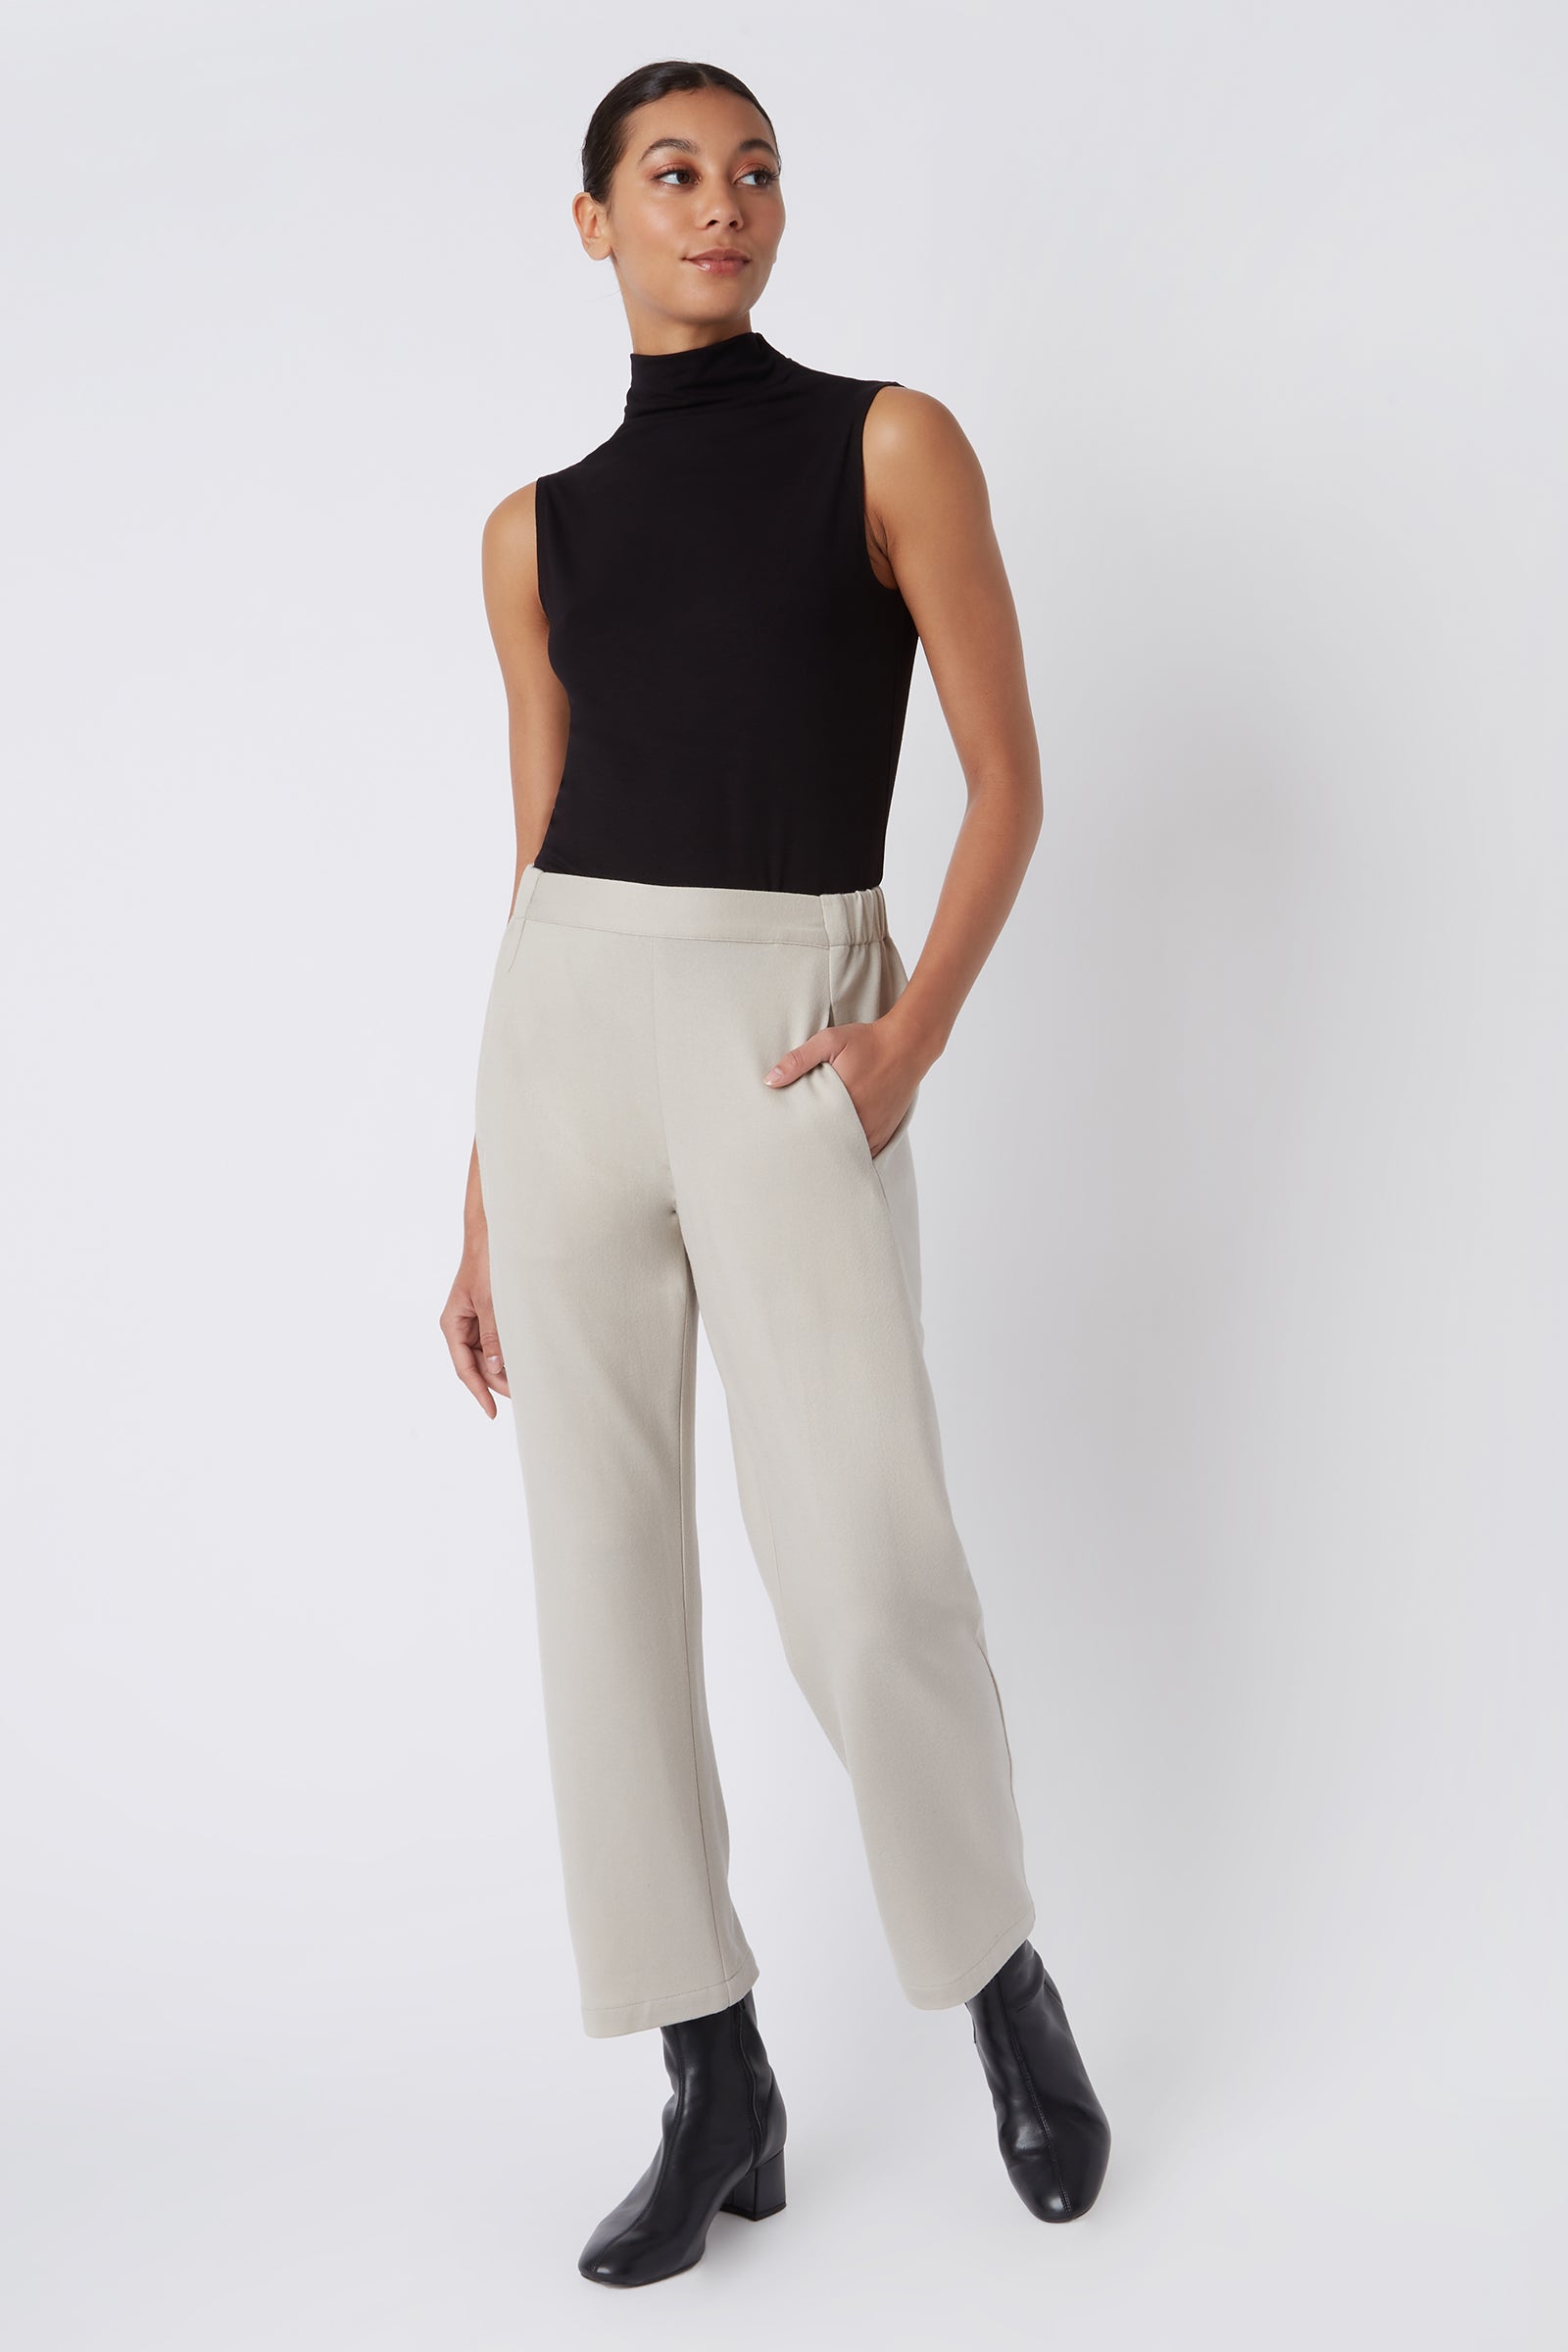 Kal Rieman Felted Jersey Angle Seam Crop Pant in Mink on Model with Hand in Pocket Full Front View